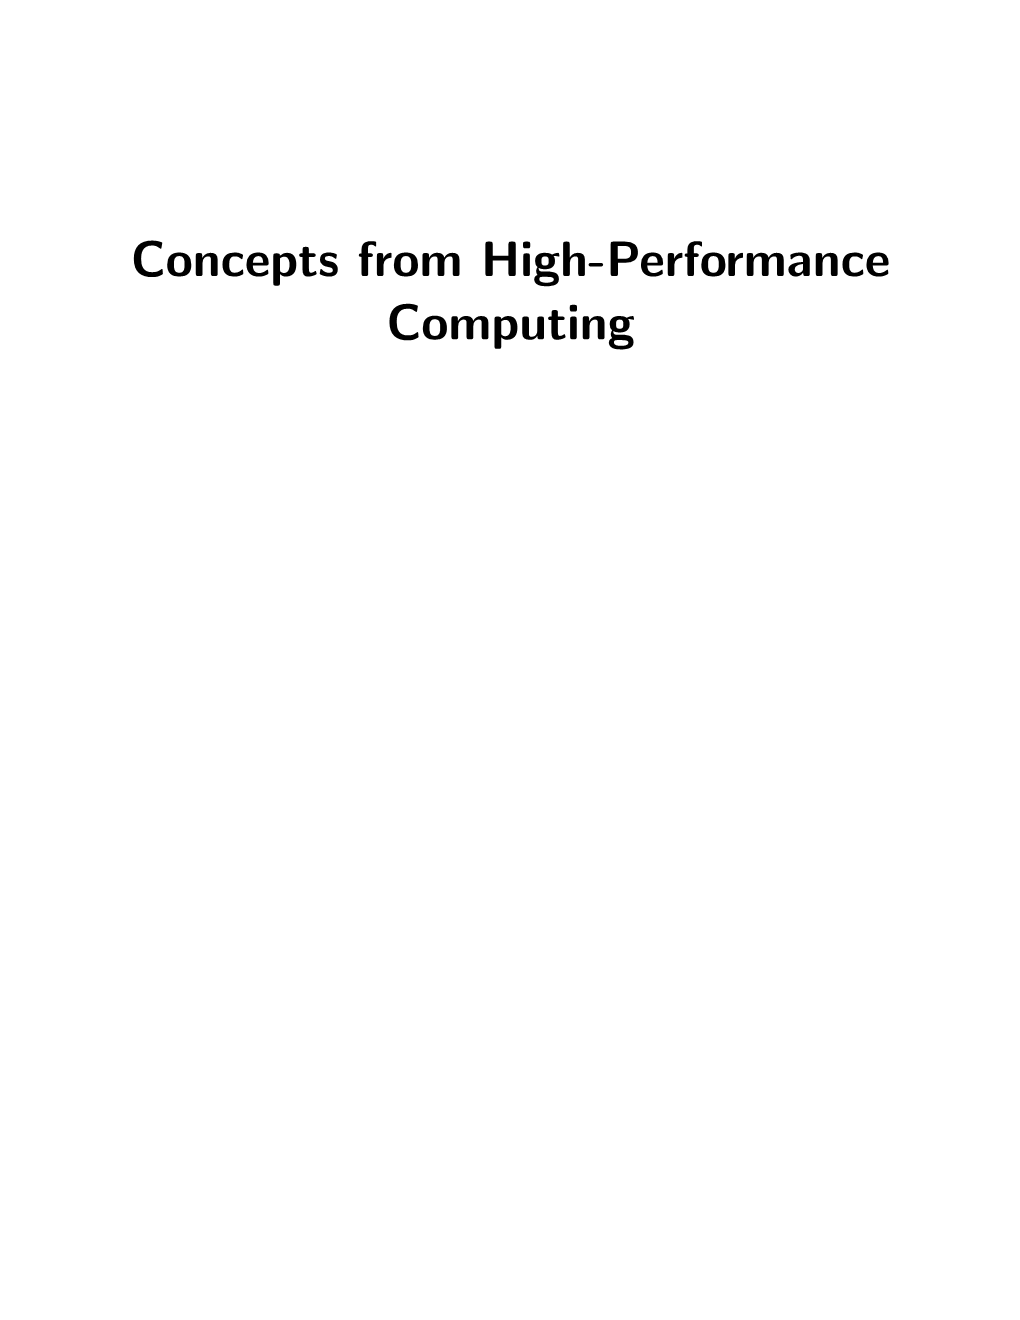 Concepts from High-Performance Computing Lecture a - Overview of HPC Paradigms